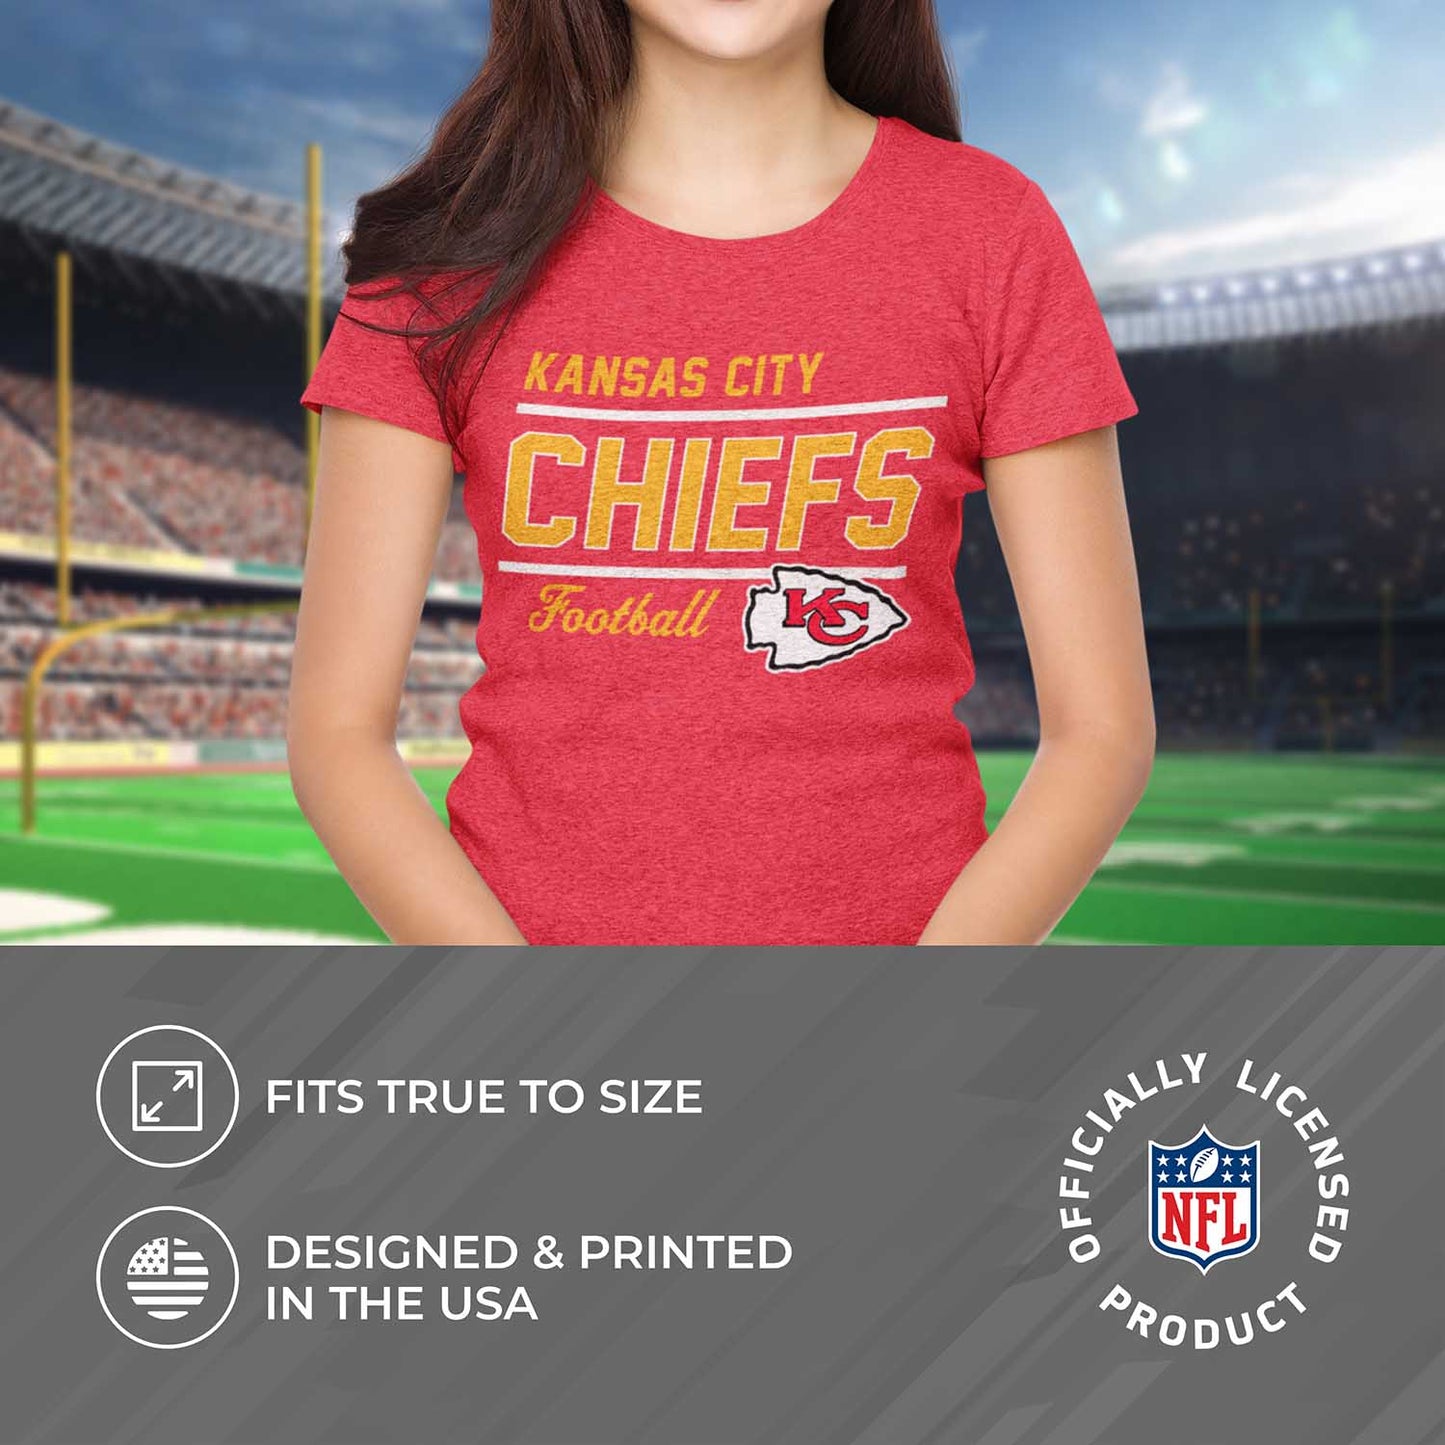 Kansas City Chiefs NFL Gameday Women's Relaxed Fit T-shirt - Red